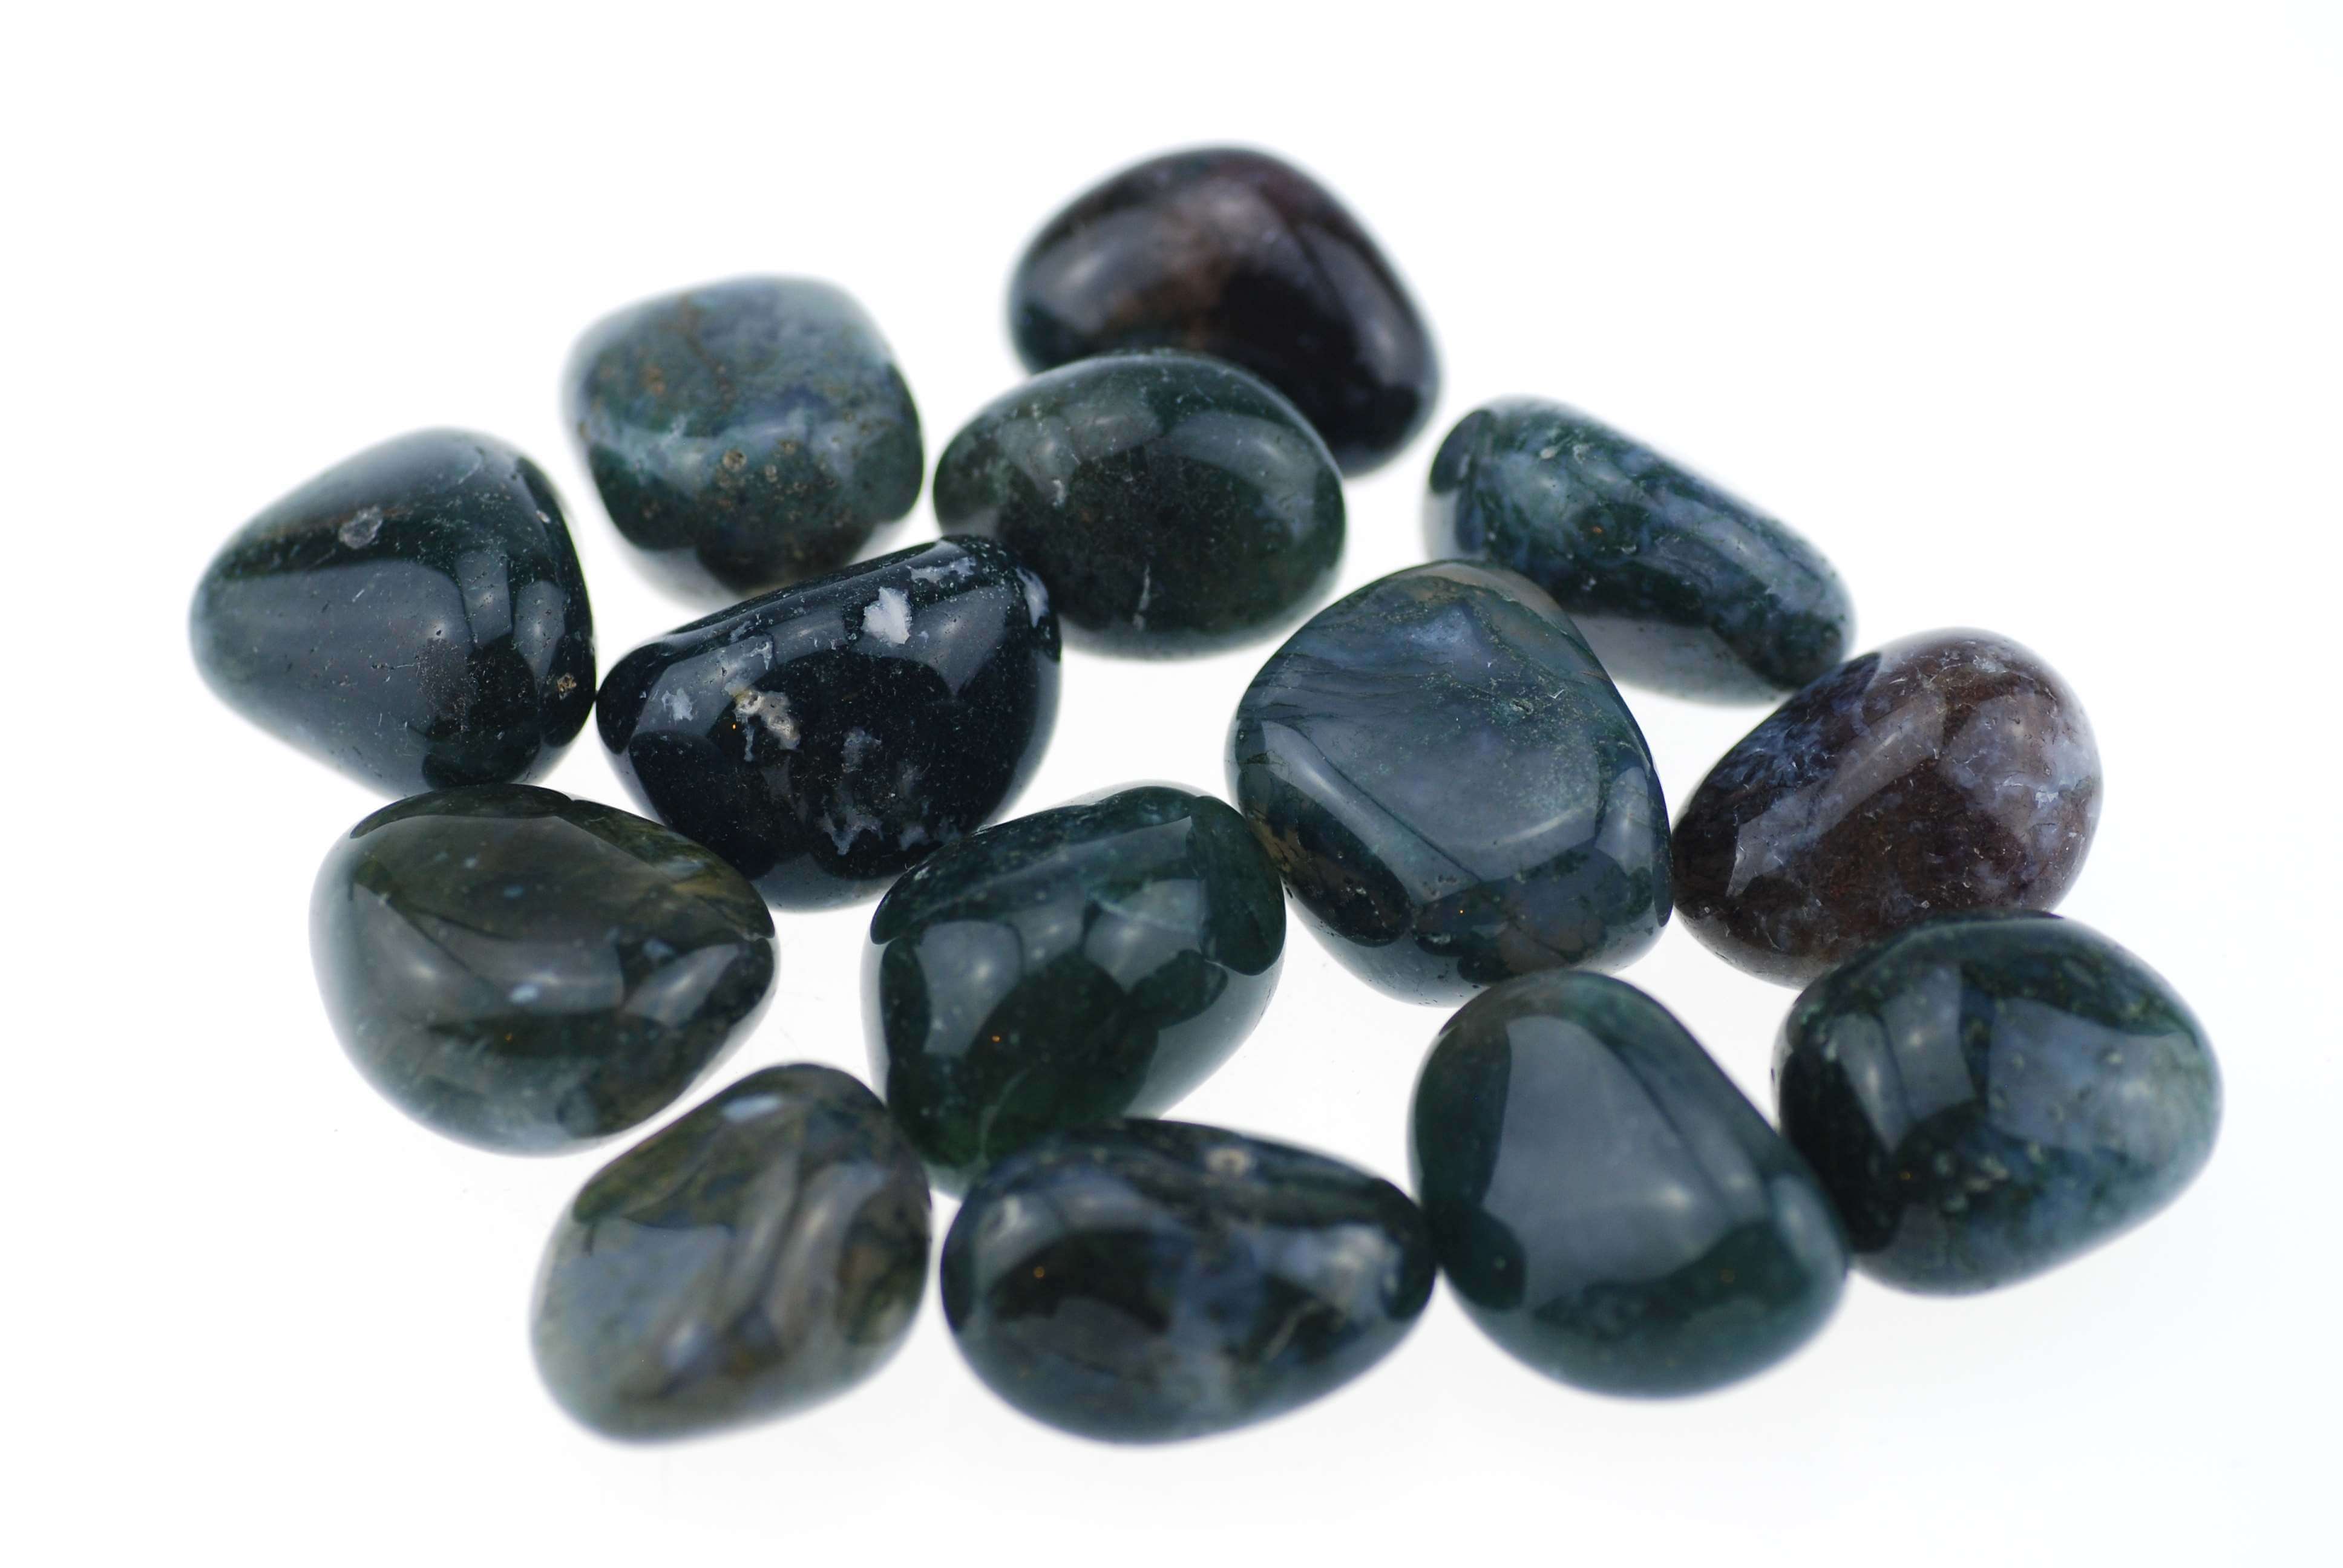 Moss Agate - Browse and Buy Beautiful Crystals Online Now!